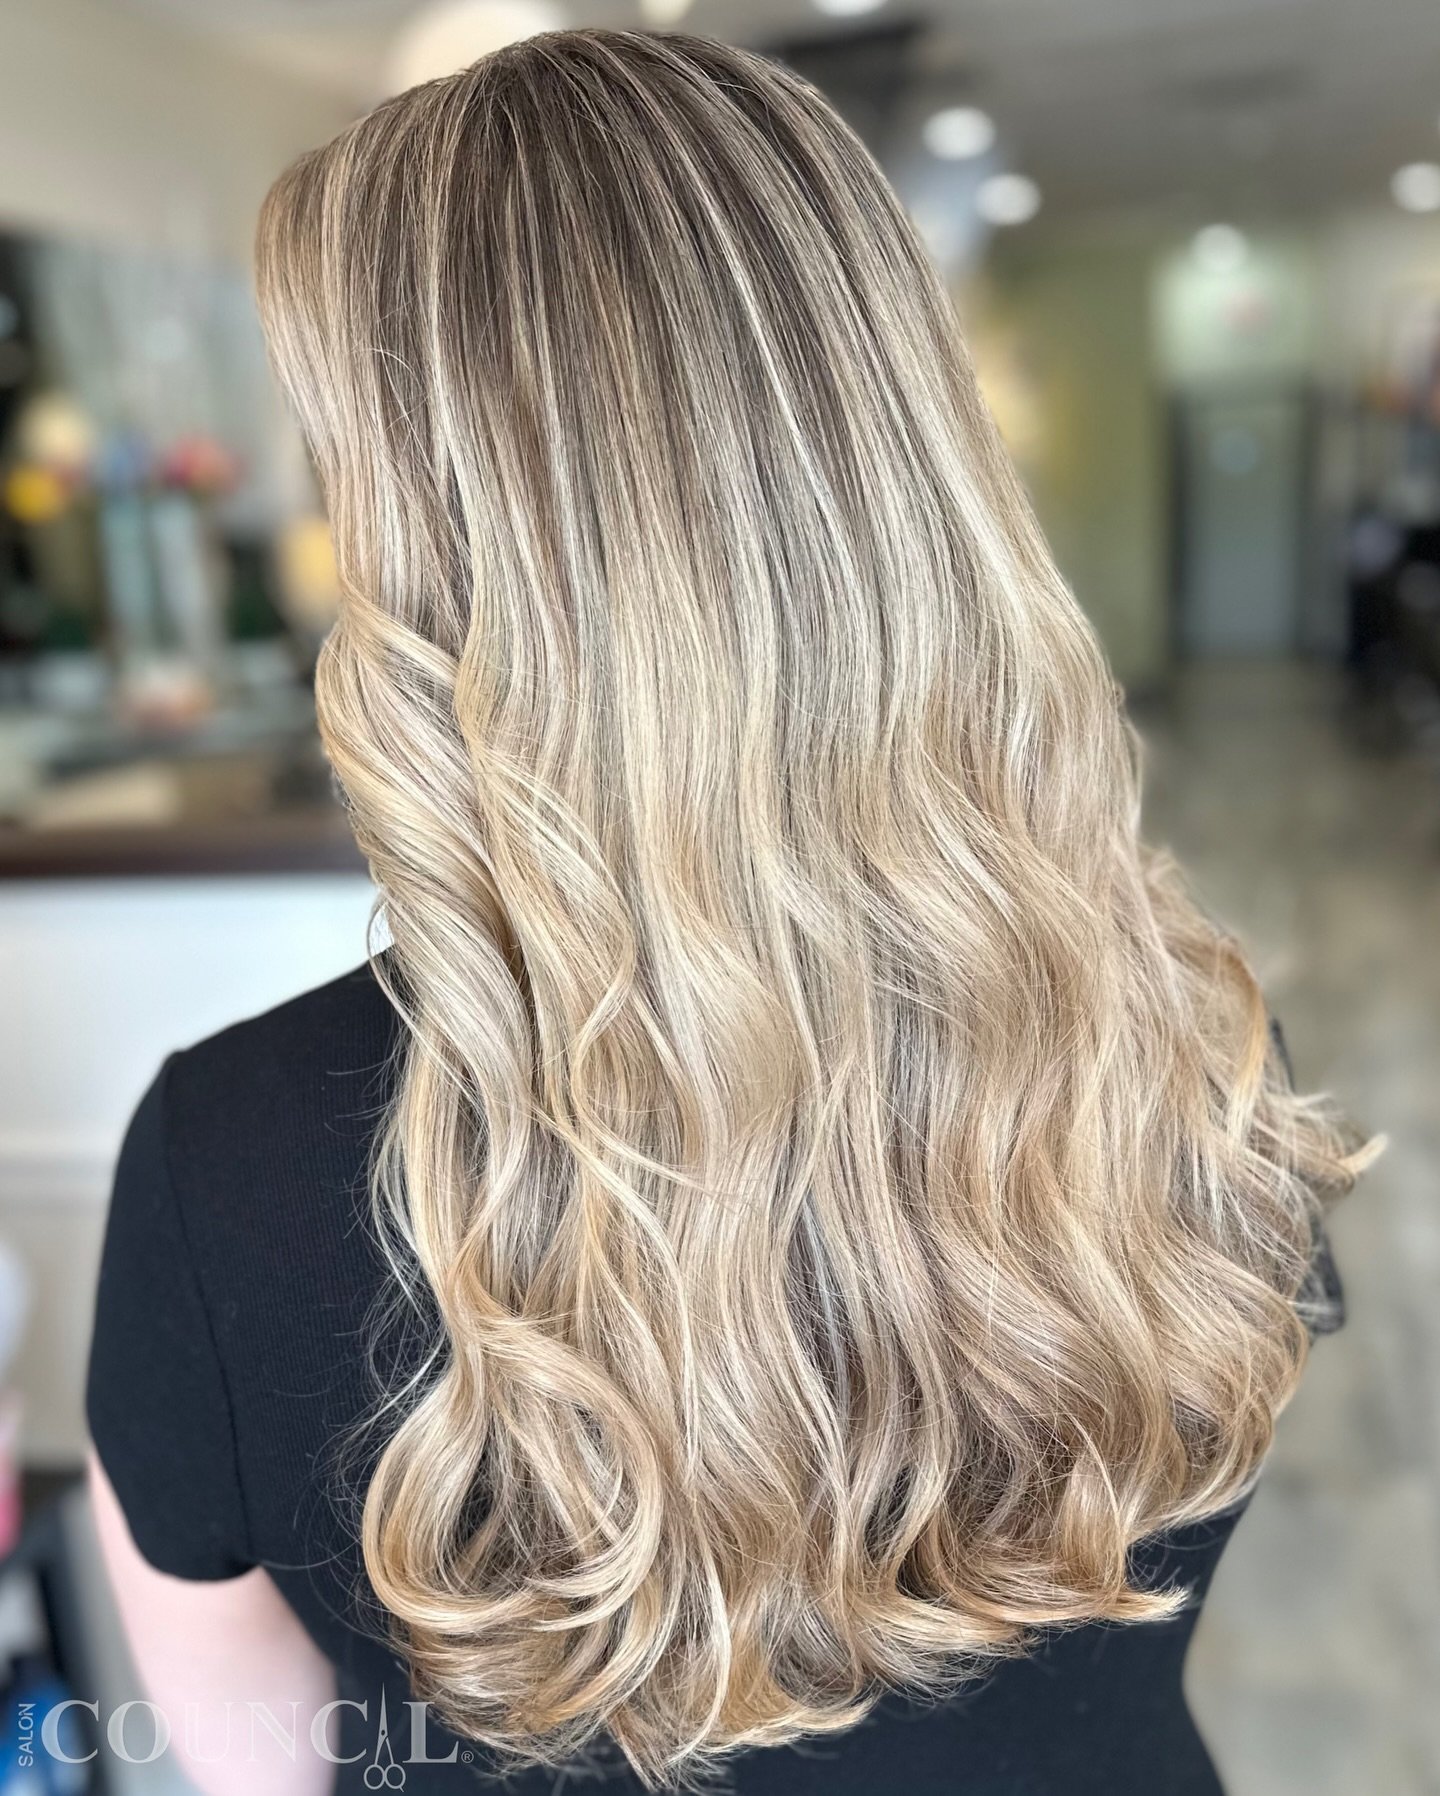 🌿#blondebalayage 
Beach vibes, no matter the season! 🌊
Achieve your dream look with blonde balayage highlights, perfected with toner and fortified with Olaplex. We&rsquo;ve topped it off with a fresh cut and a blowdry that curls into effortless bea